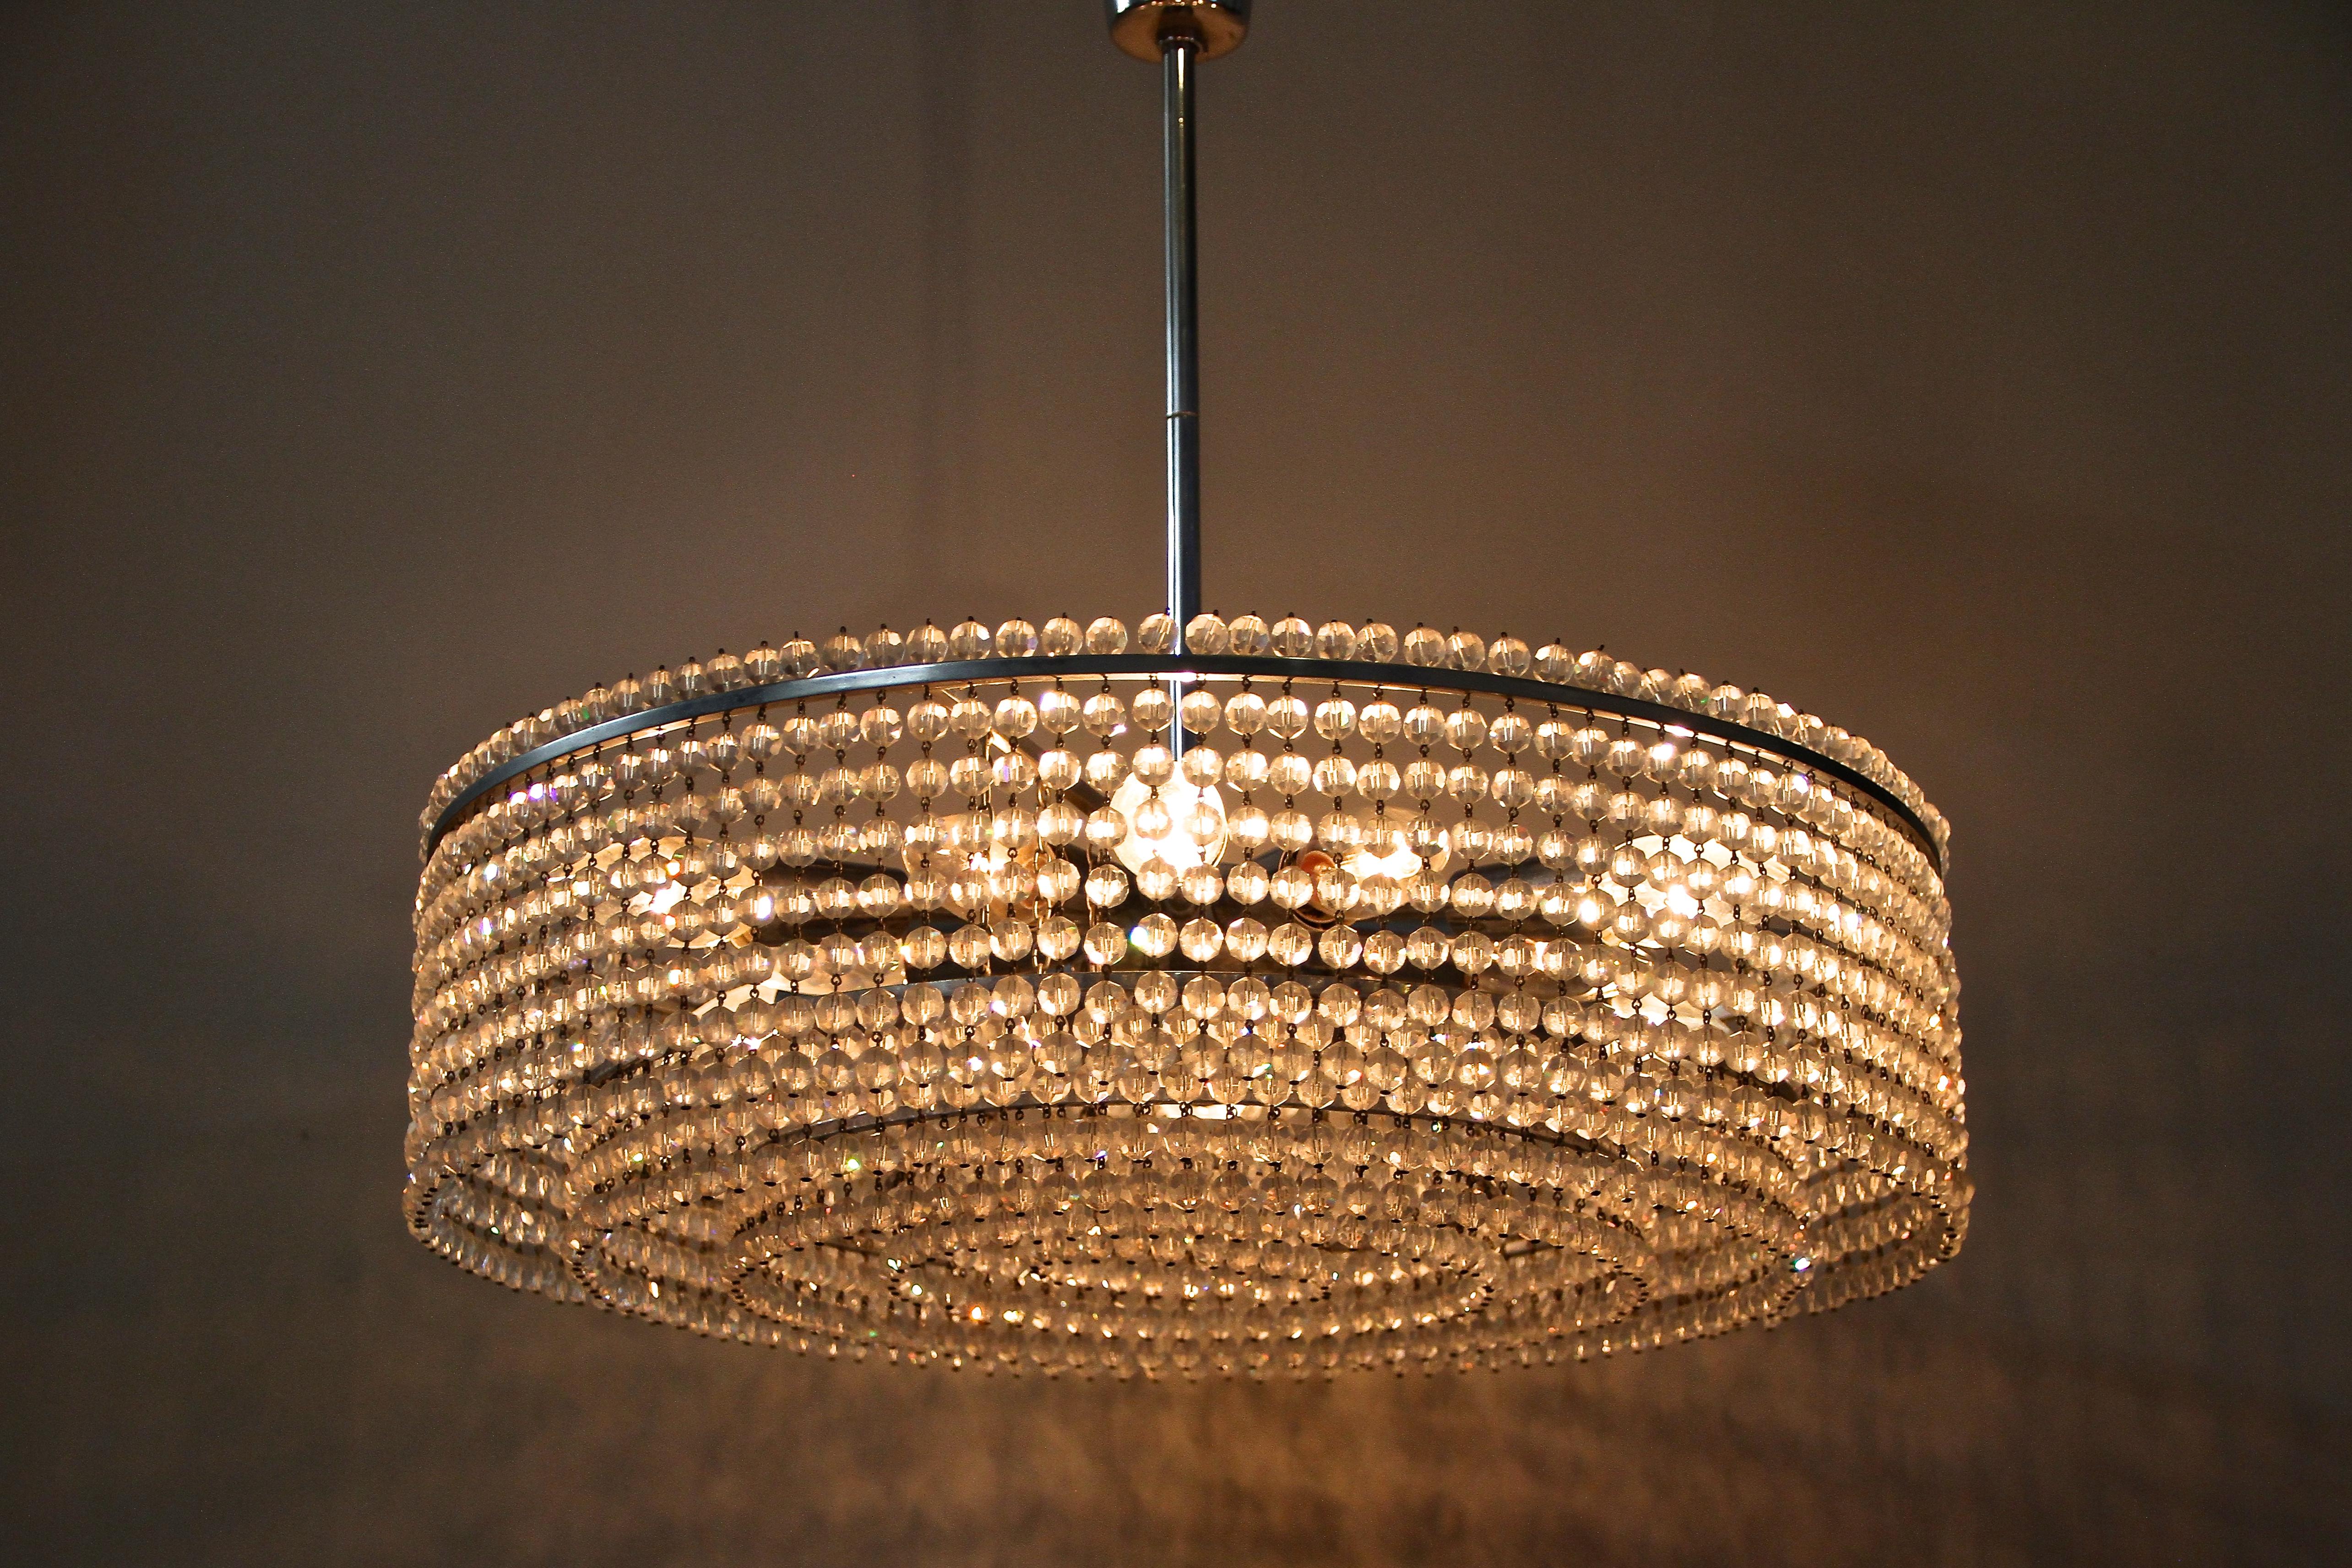 Fabulous Mid-Century glass chandelier made in Austria, around 1960. A timeless lightning piece with an amazing design built of hundreds of small cut glass pearls mounted on five rings in different heights. This very elaborate construction in